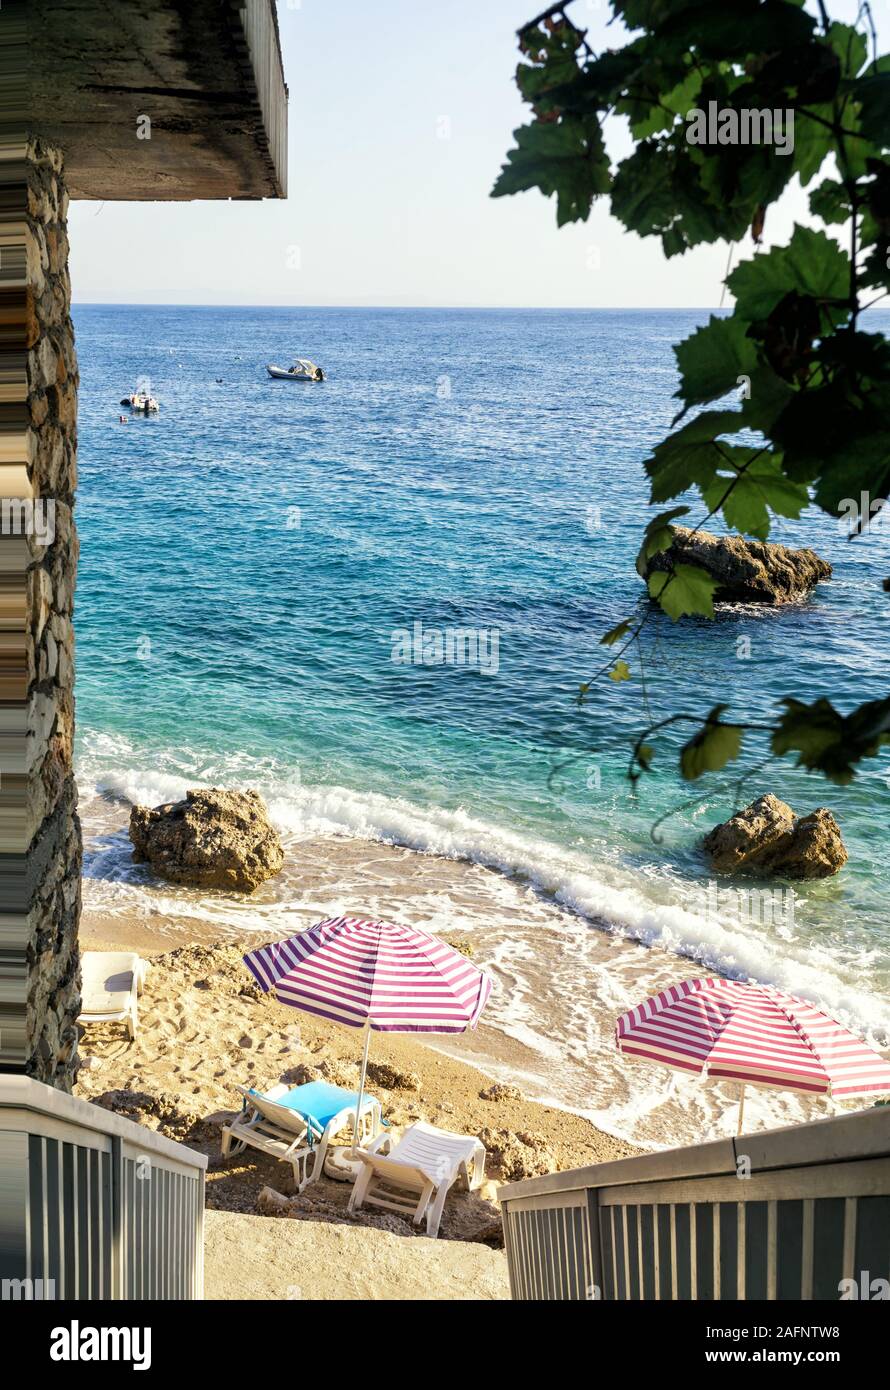 Small secluded beach with umbrellas and sunbeds on a sunny summer day, turquoise transparent water, view from above. Ionian sea coast, Albania. Stock Photo